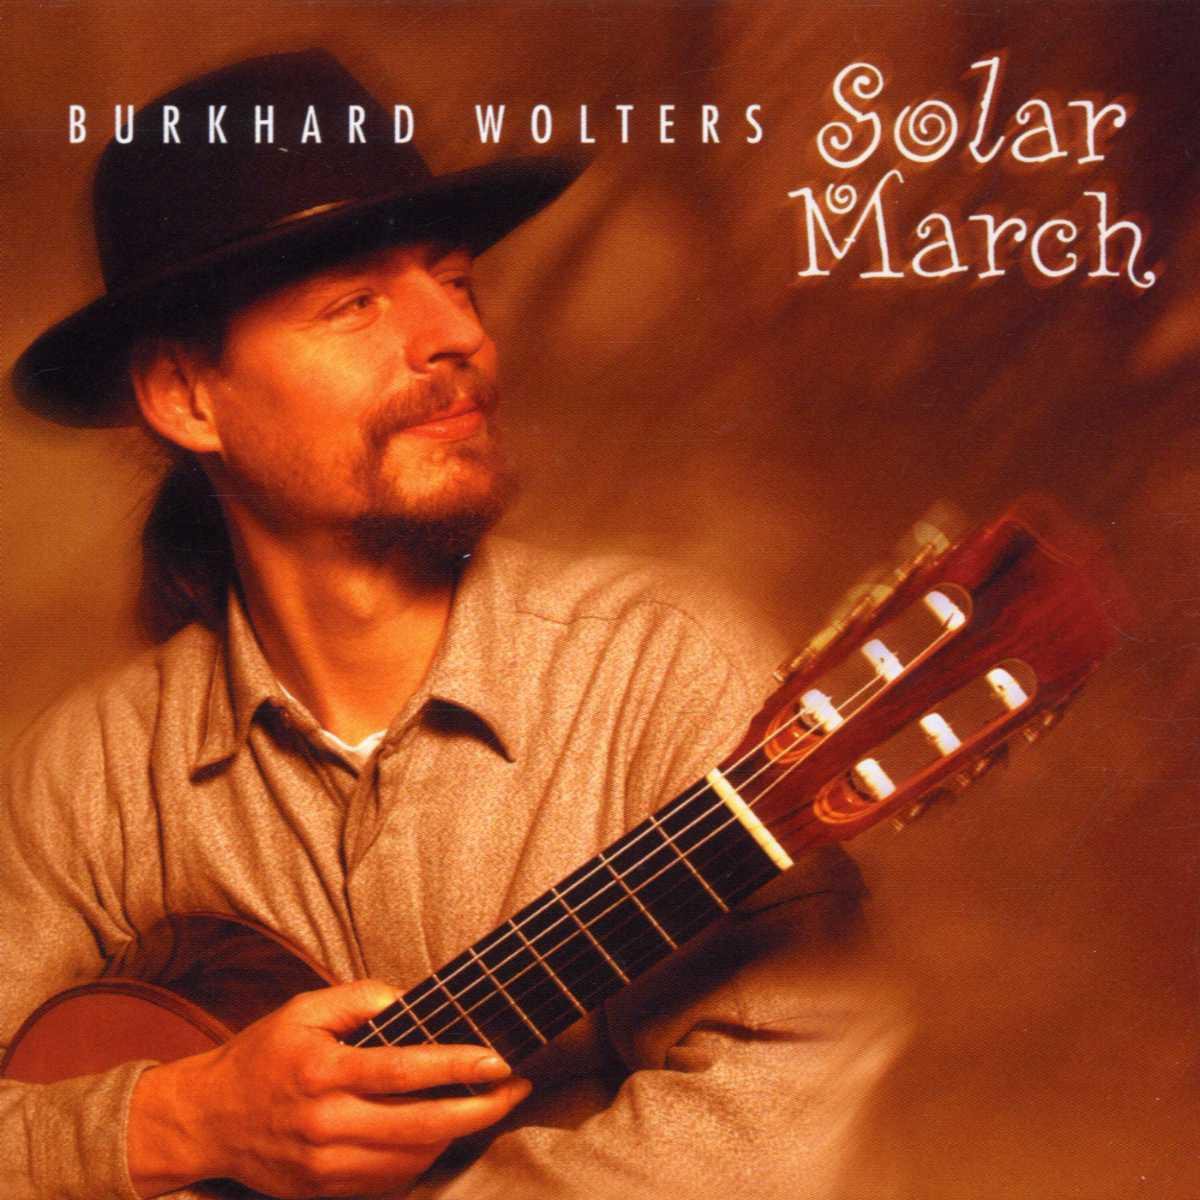 Afbeelding van product Music&Words  Solar March  - Buck Wolters